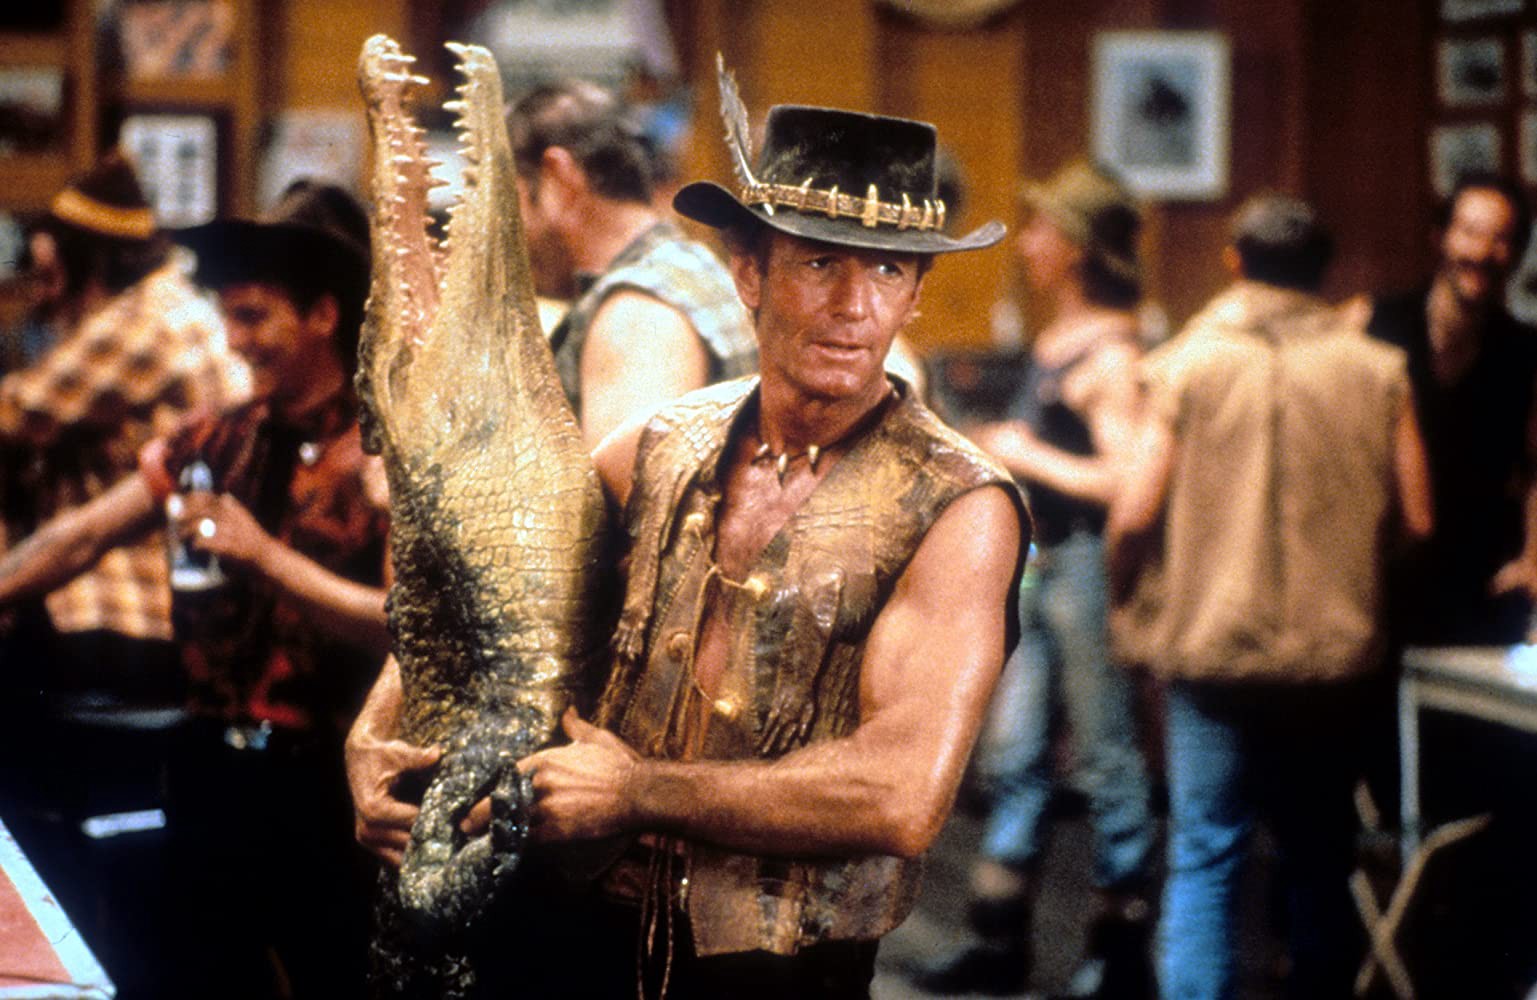 Mick, wearing an open leather vest and a feathered hat, holds a taxidermy crocodile